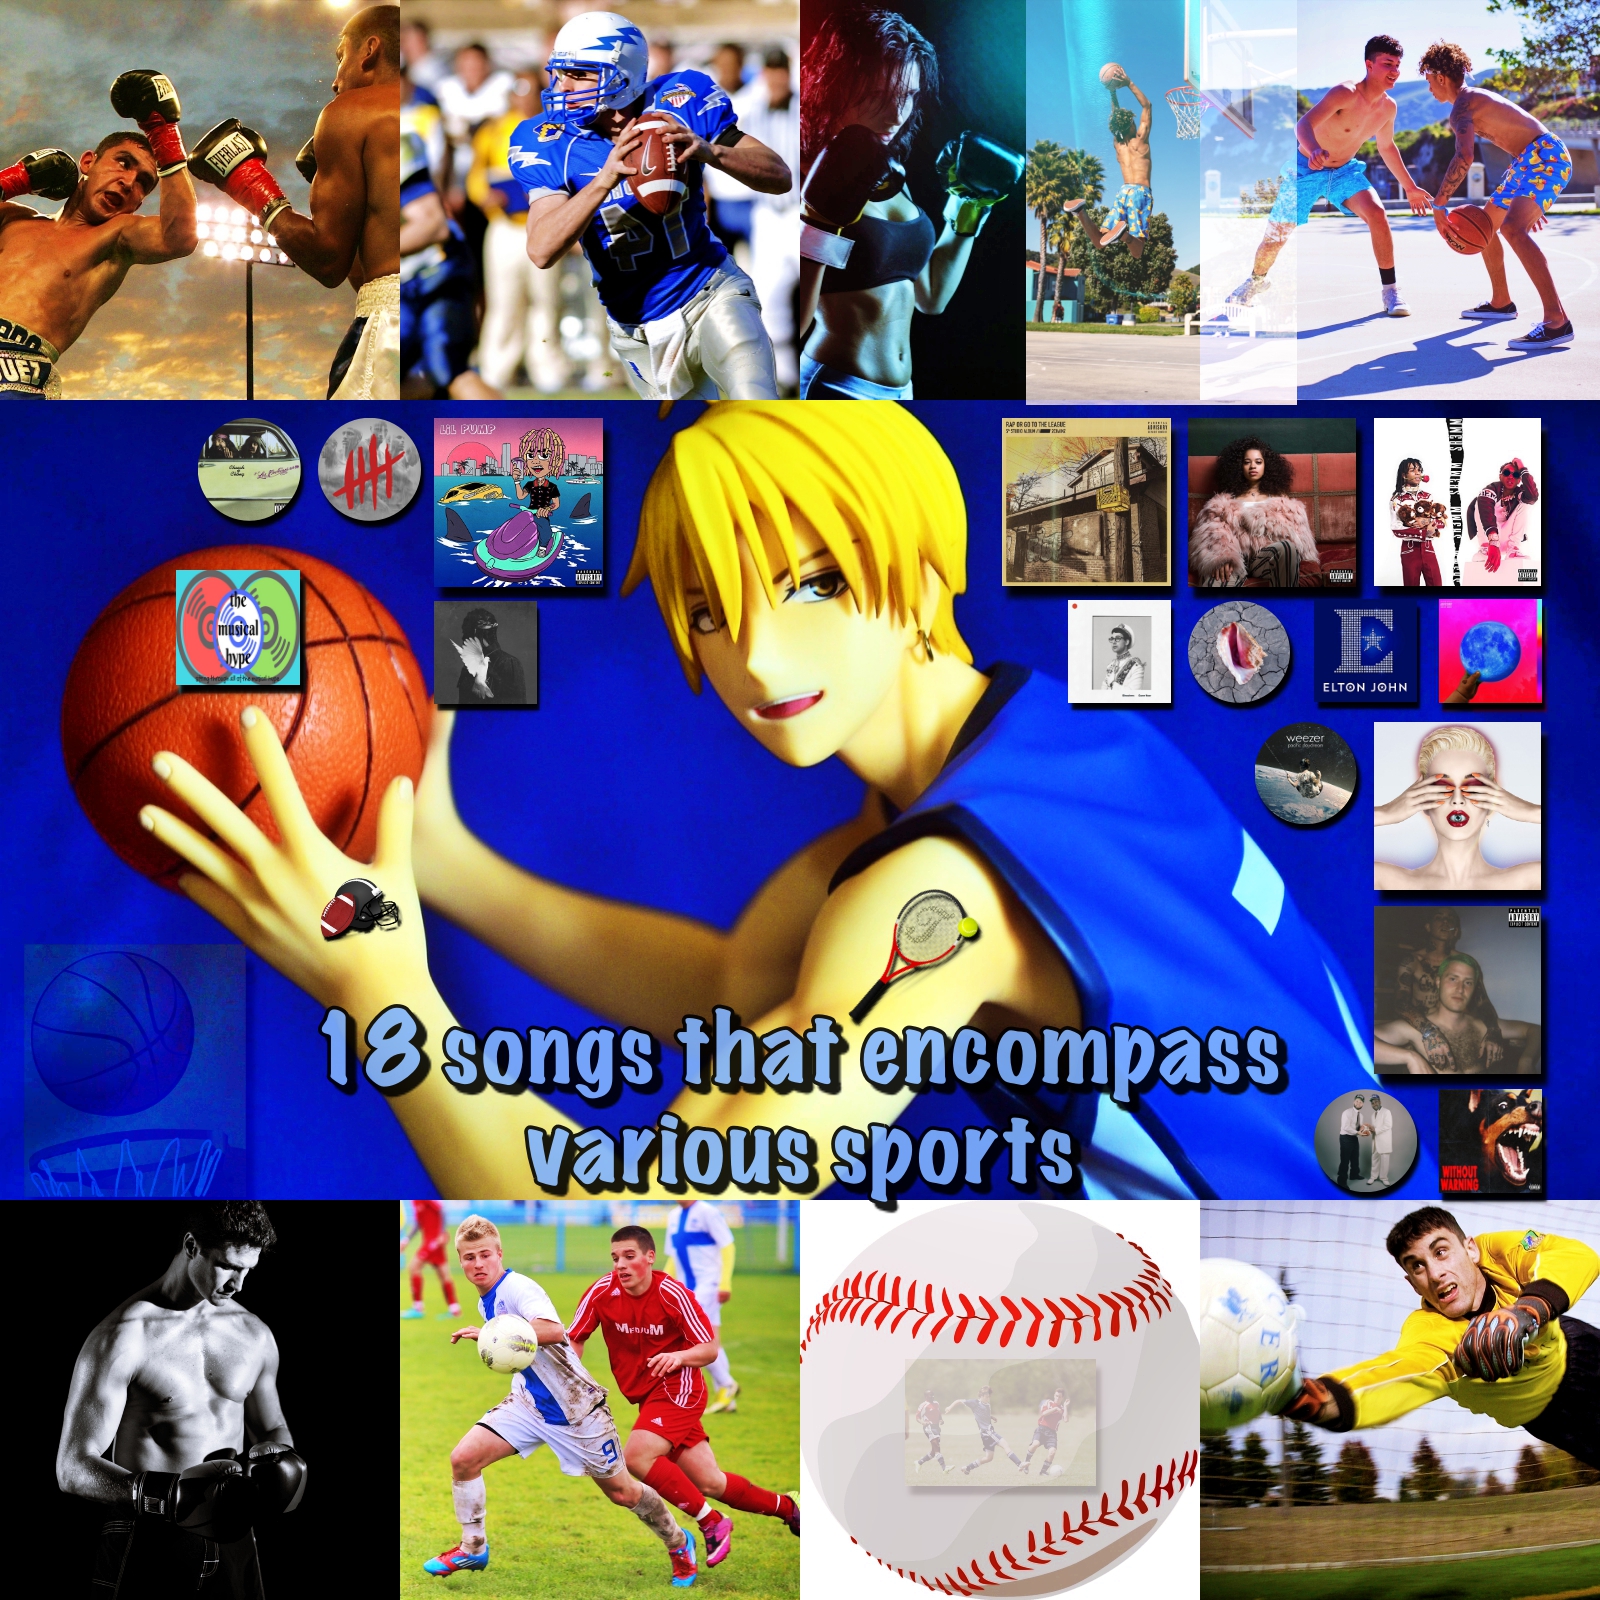 SONG vs SONG SPORTS! LET THE GAMES BEGIN IN JANUARY! 👉  www.musicisoursport.com/emics 👈